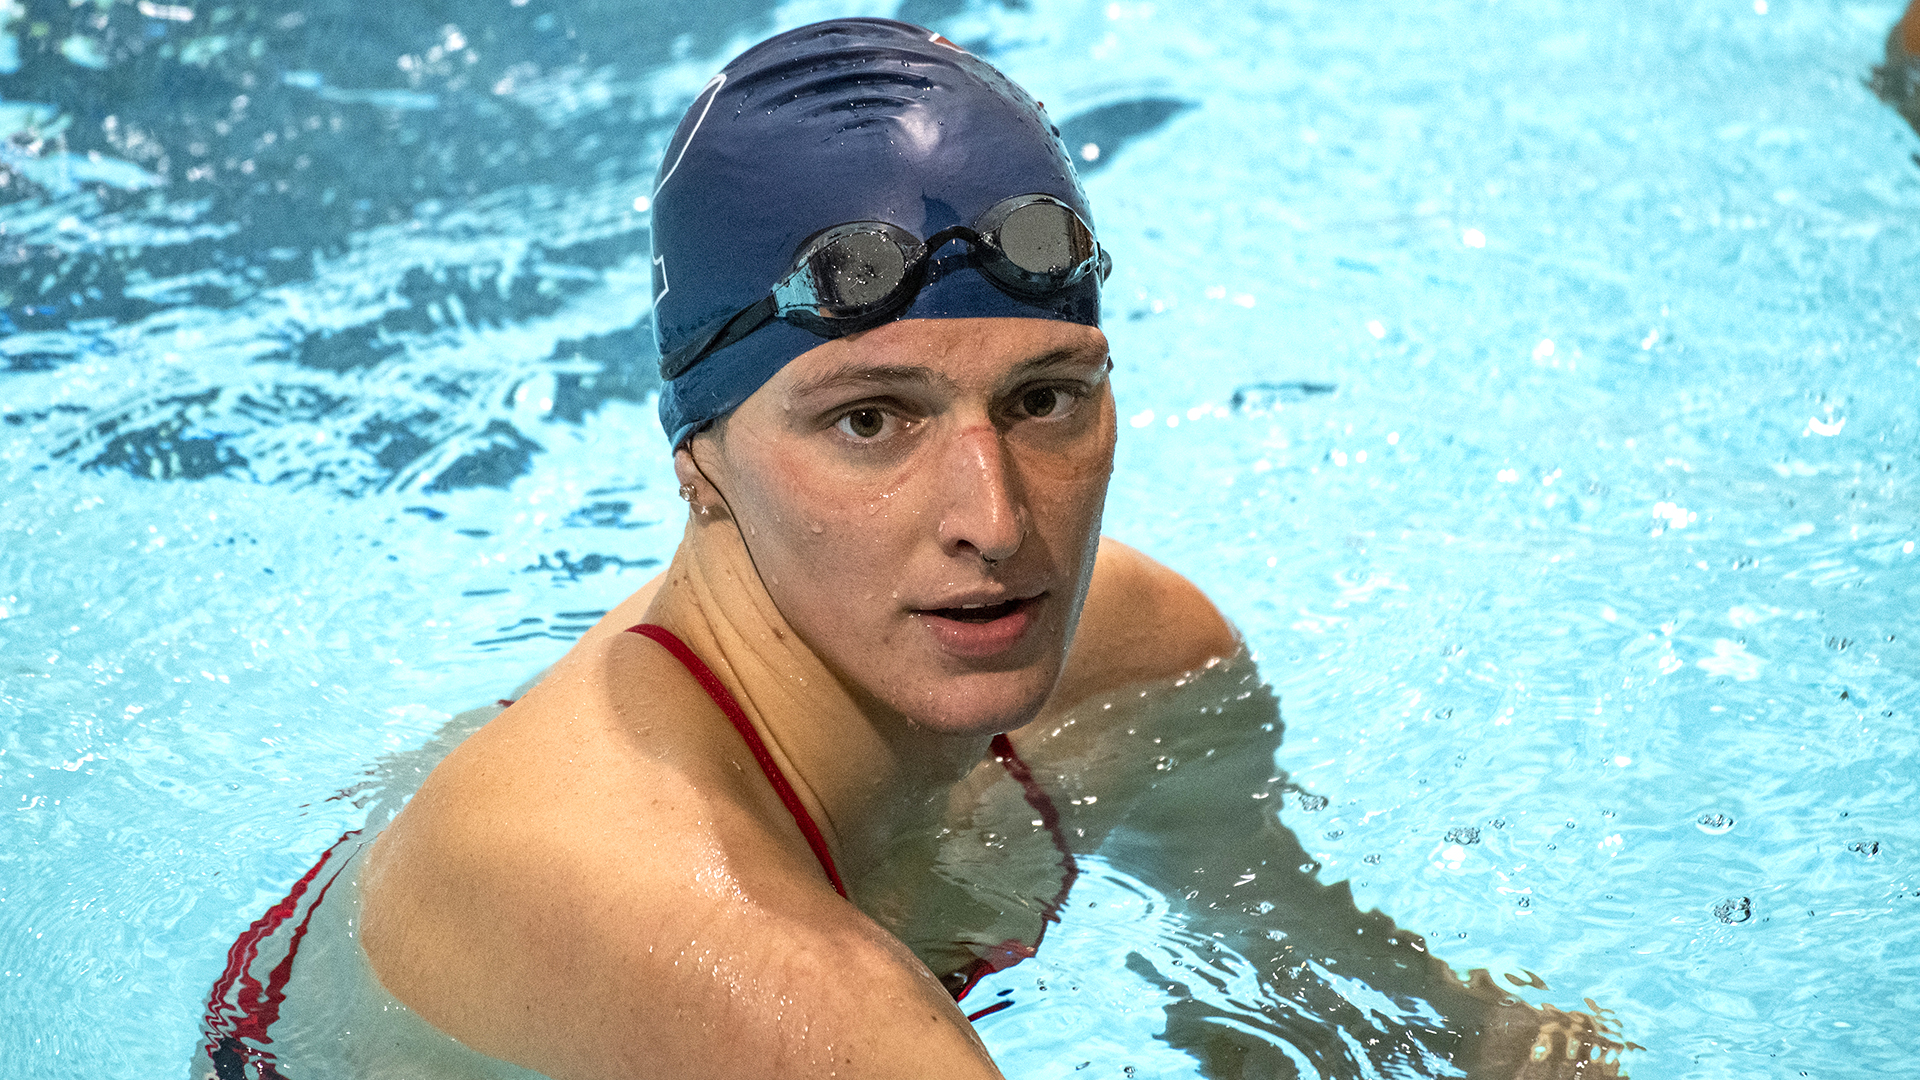 (FILES) In this file photo taken on January 22, 2022, US swimmer Lia Thomas, a transgender woman, finishes the 200-yard Freestyle for the University of Pennsylvania at an Ivy League swim meet against Harvard University in Cambridge, Massachusetts. - Thomas' controversial career as a transgender swimmer hung in the balance on February 2, 2022, after the collegiate body governing the sport announced new rules that could impact her ability to race competitively. USA Swimming said it created a new set of guidelines at the elite level for transgender athlete participation that "relies on science and medical evidence-based methods to provide a level-playing field for elite cisgender women, and to mitigate the advantages associated with male puberty and physiology." (Photo by Joseph Prezioso / AFP)